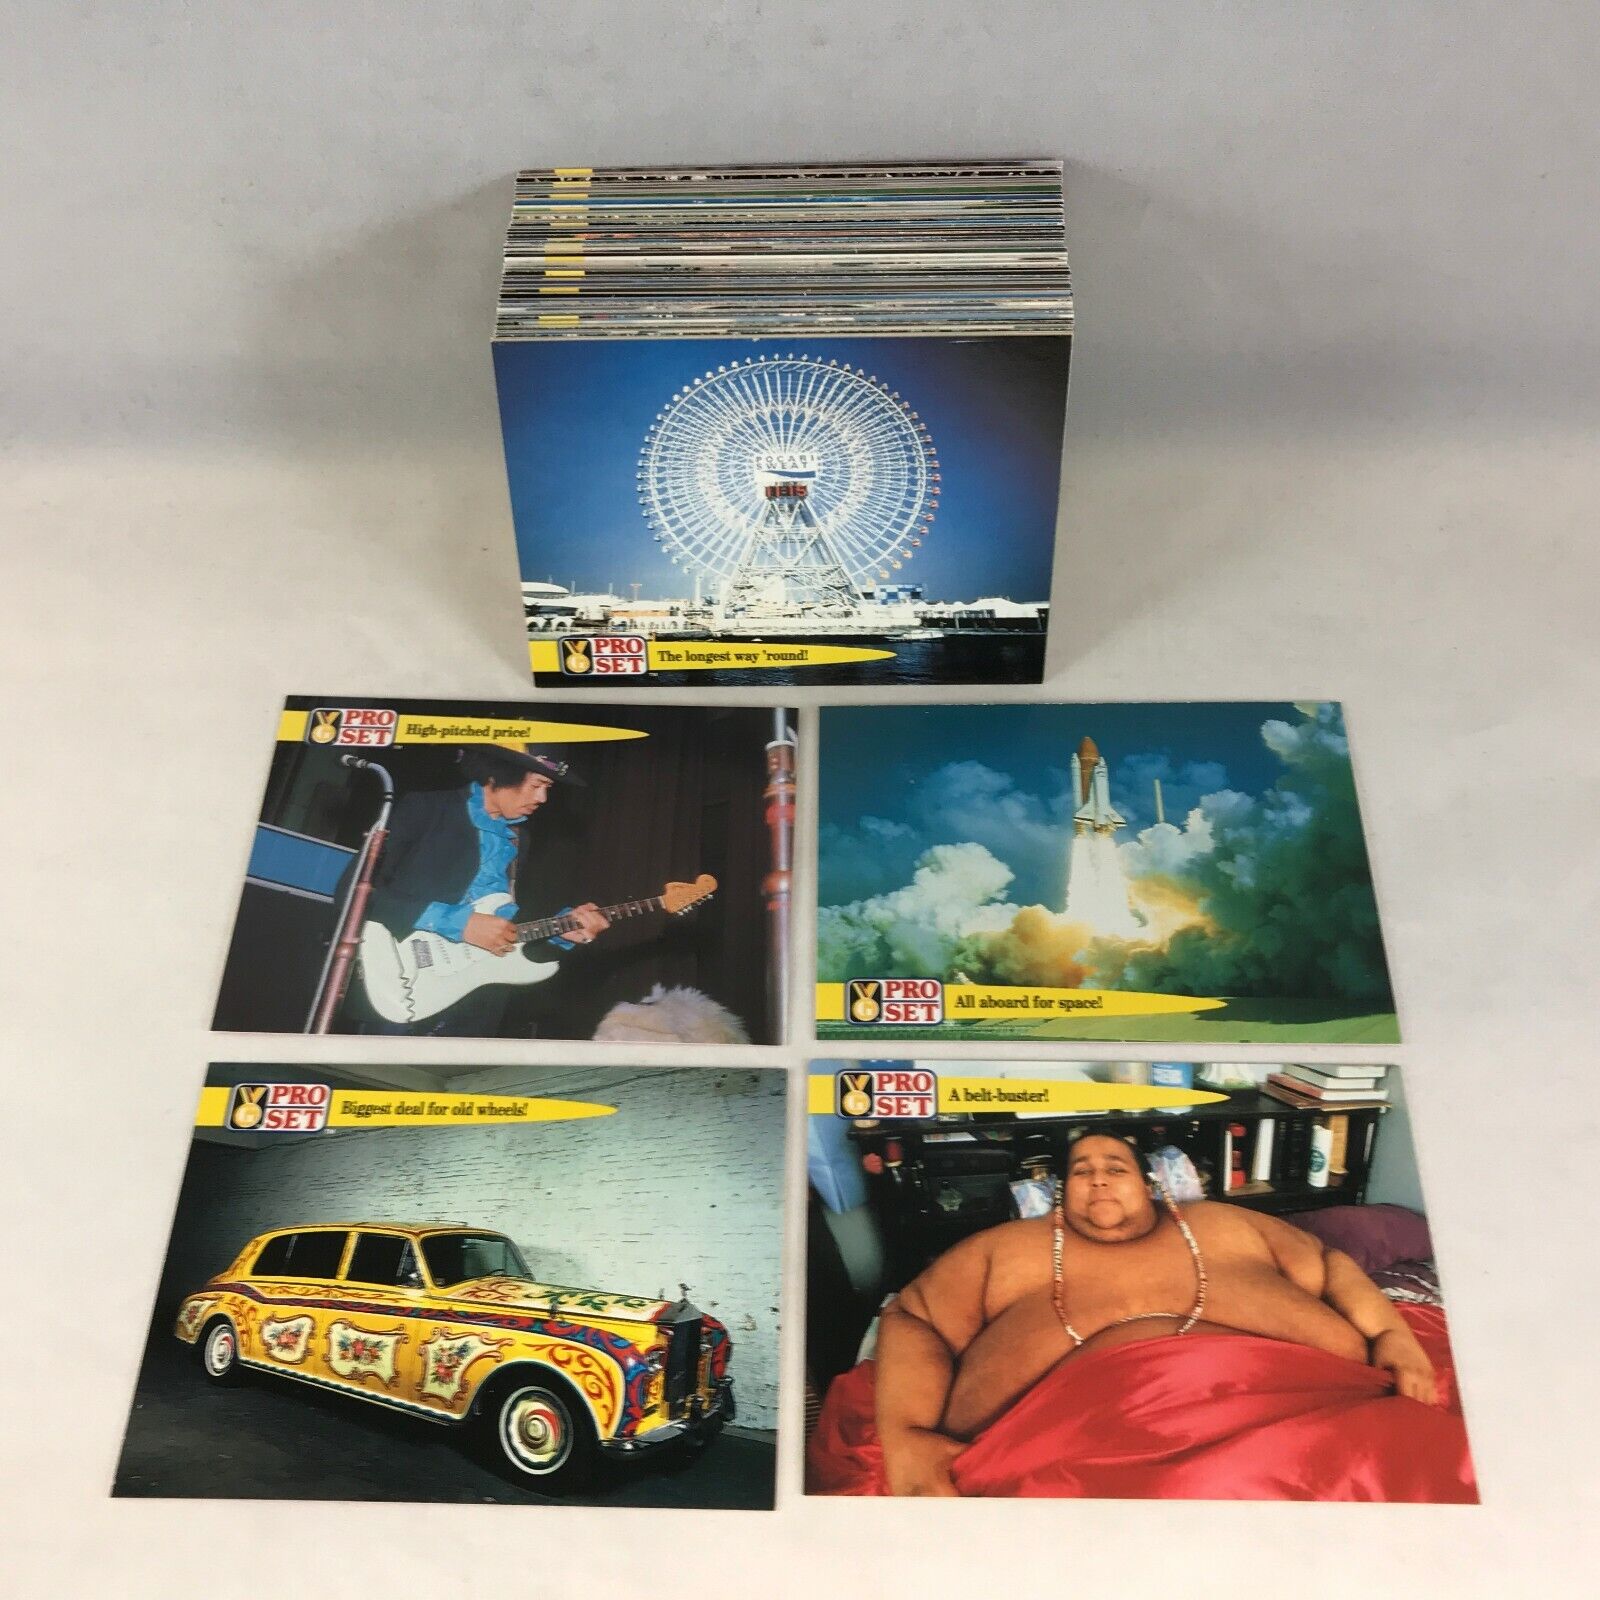 THE GUINNESS BOOK OF WORLD RECORDS OFFICIAL TRADING CARD SET from 1992 by PROSET